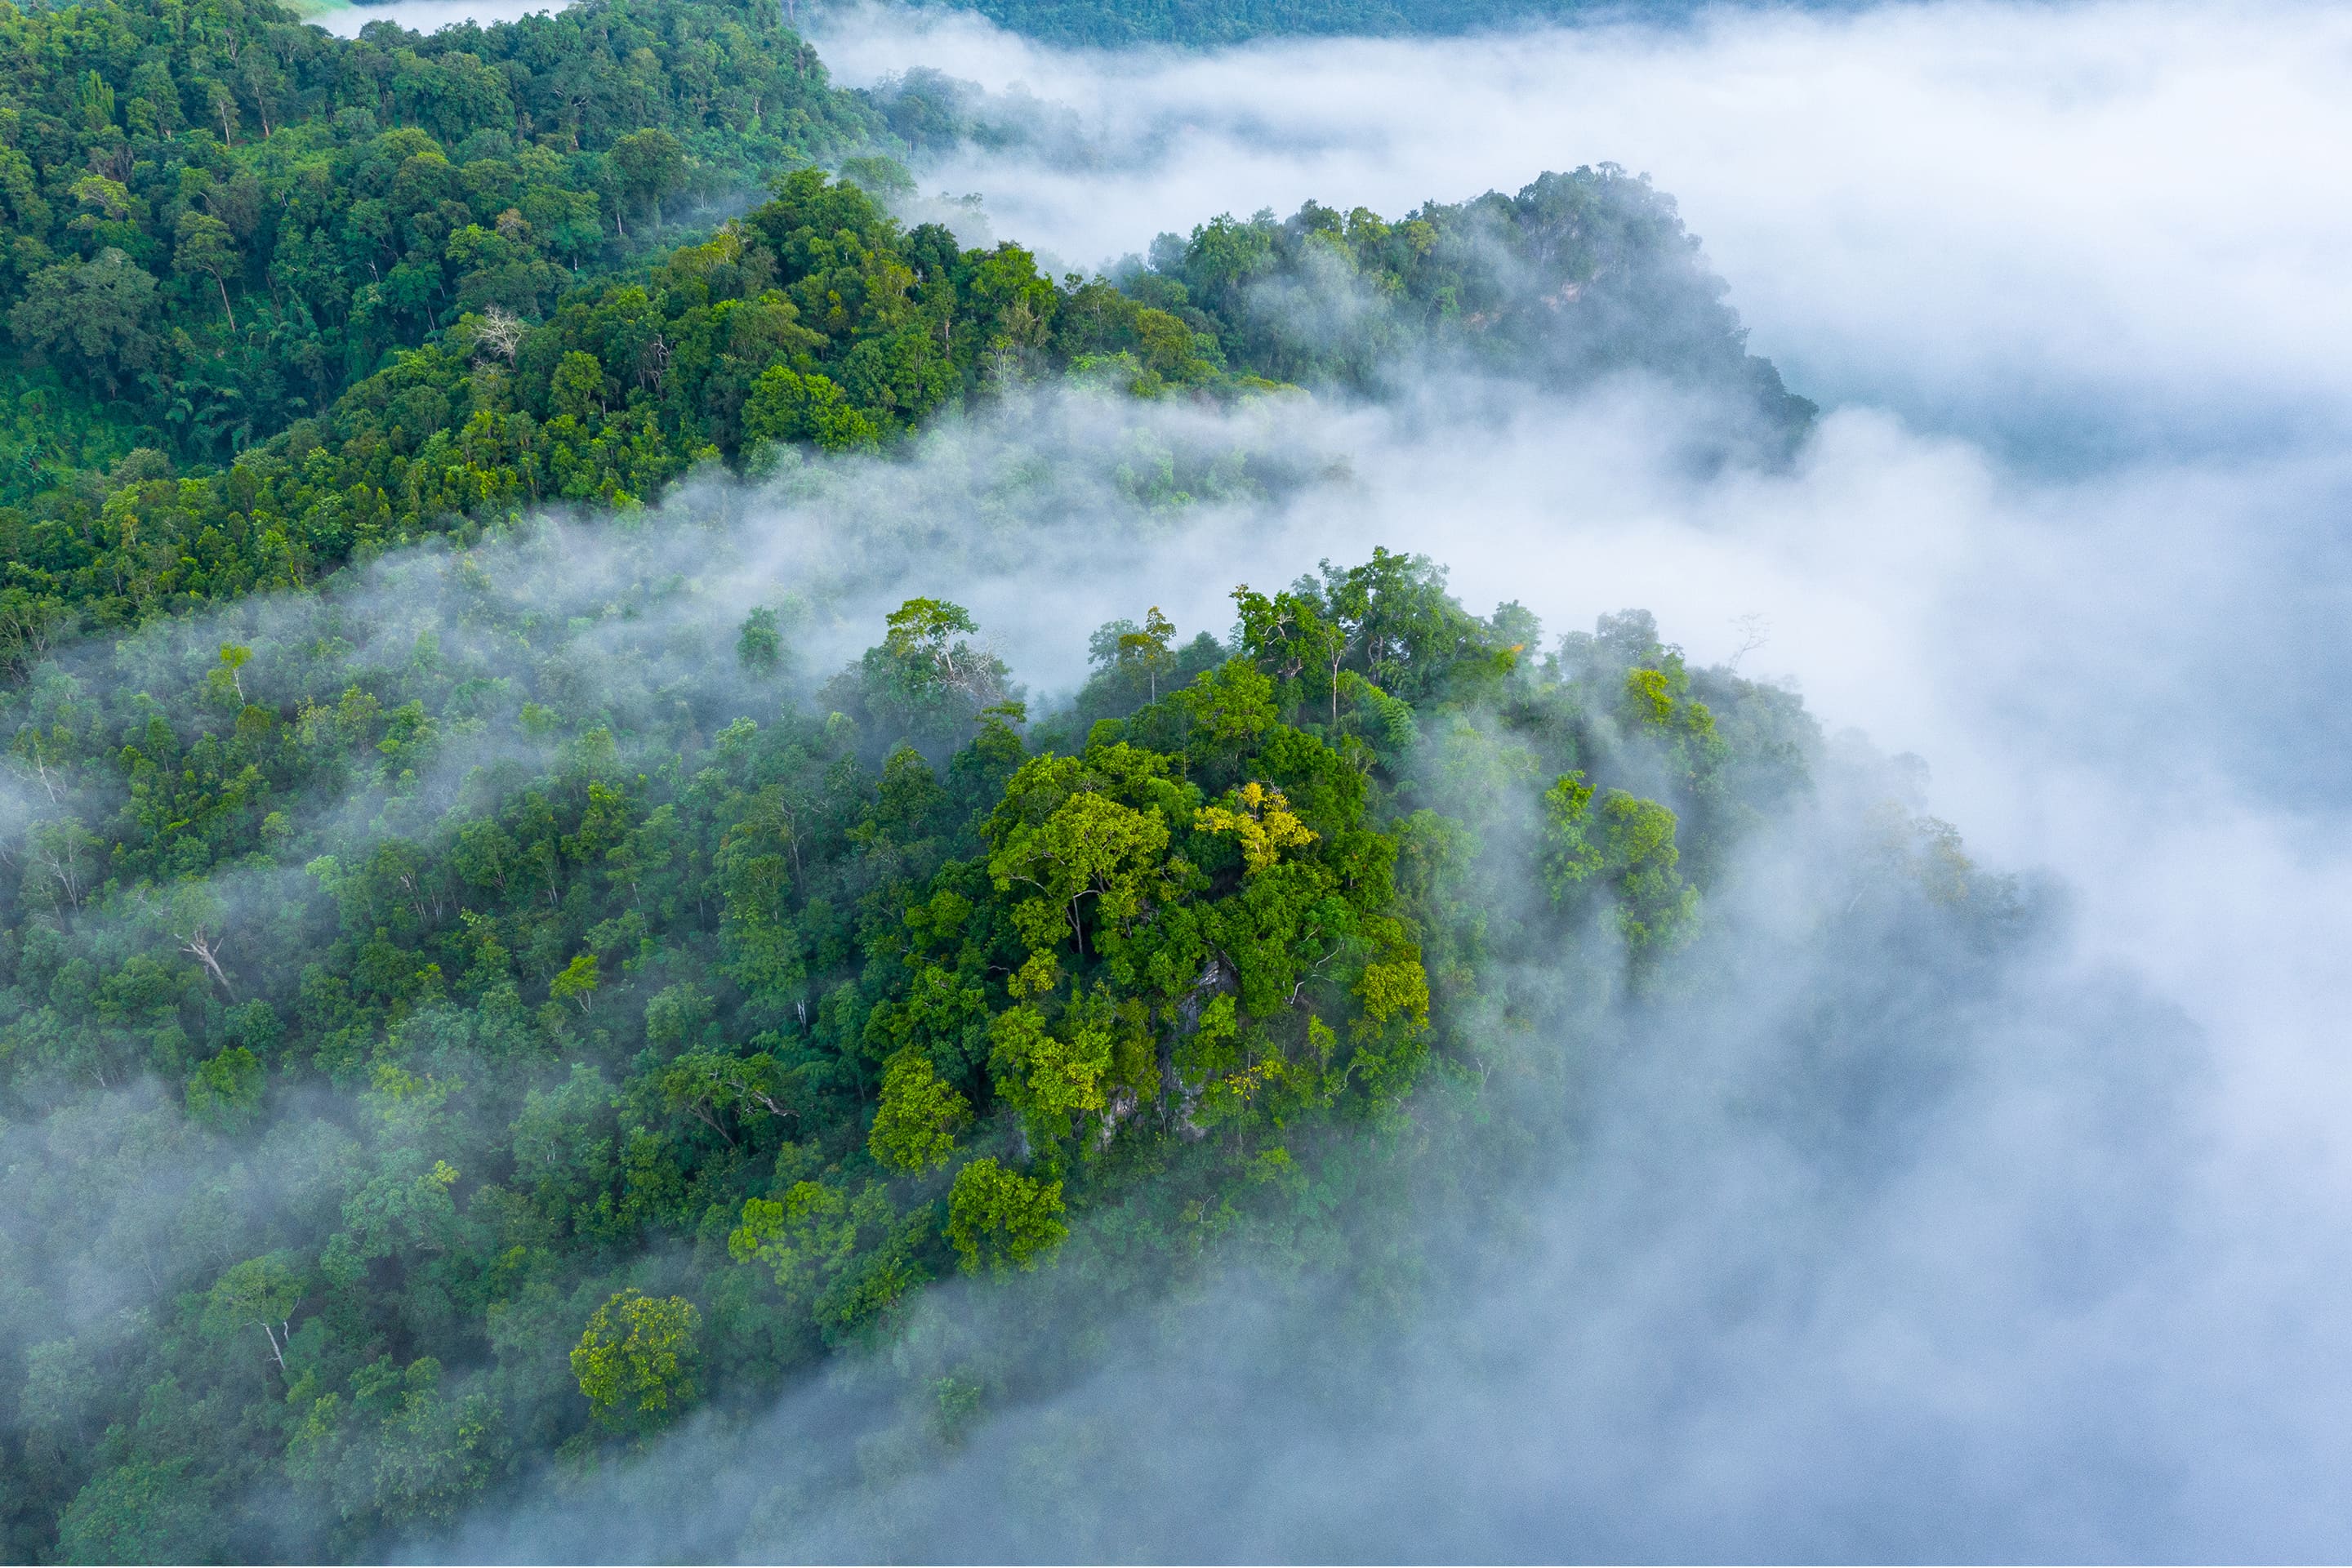 Aerial view of a lush green forest shrouded in white mist.